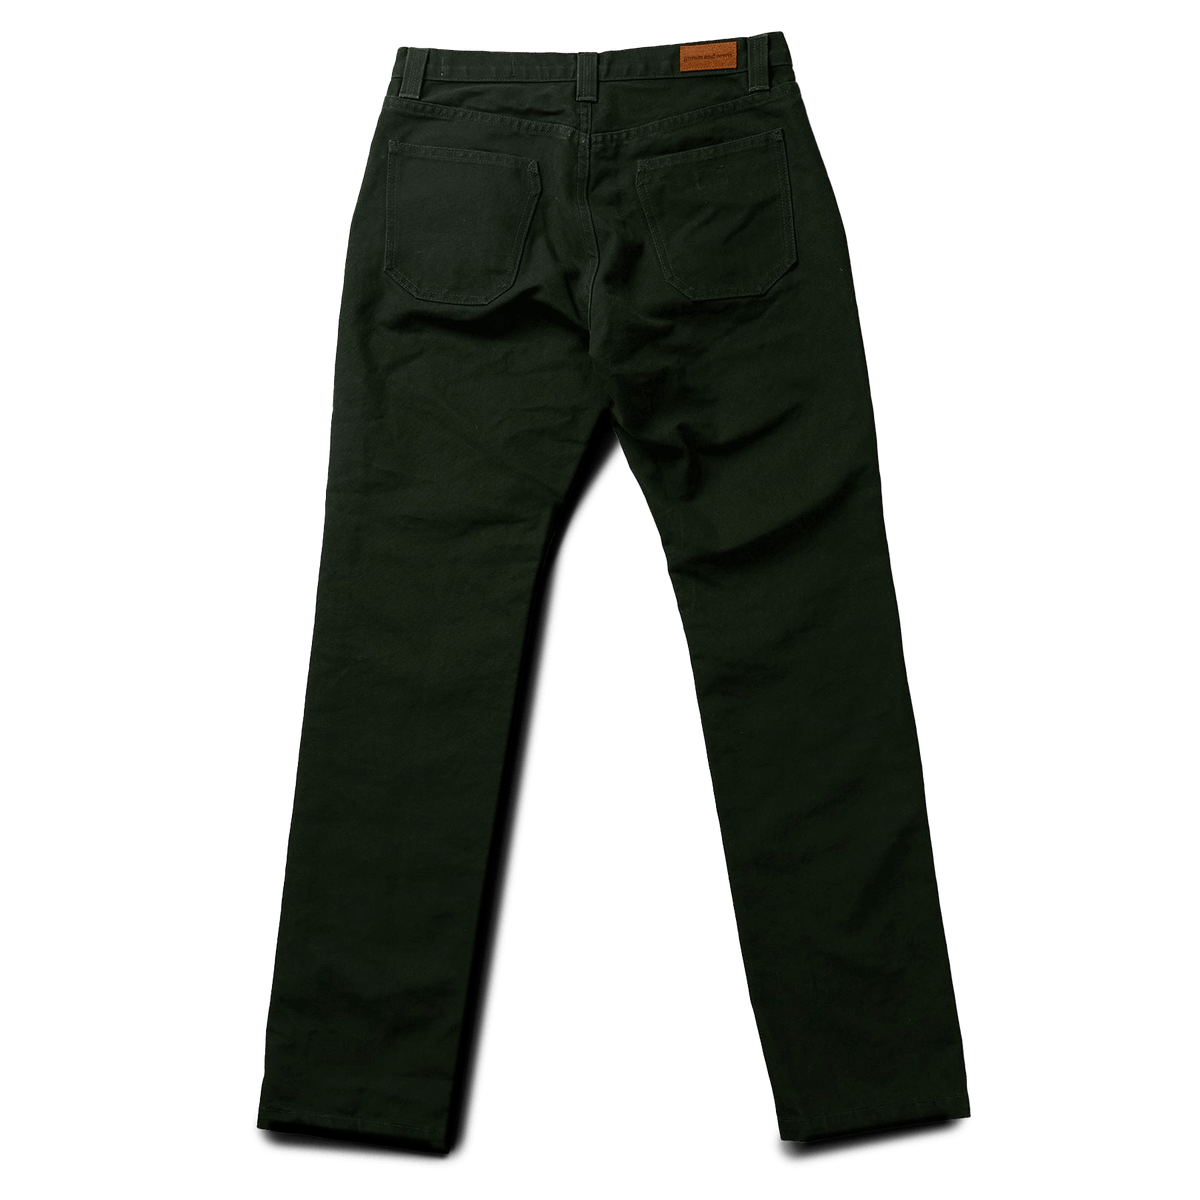 (2ND) Foundation Canvas Pant - 12 oz. - Evergreen - grown&amp;sewn